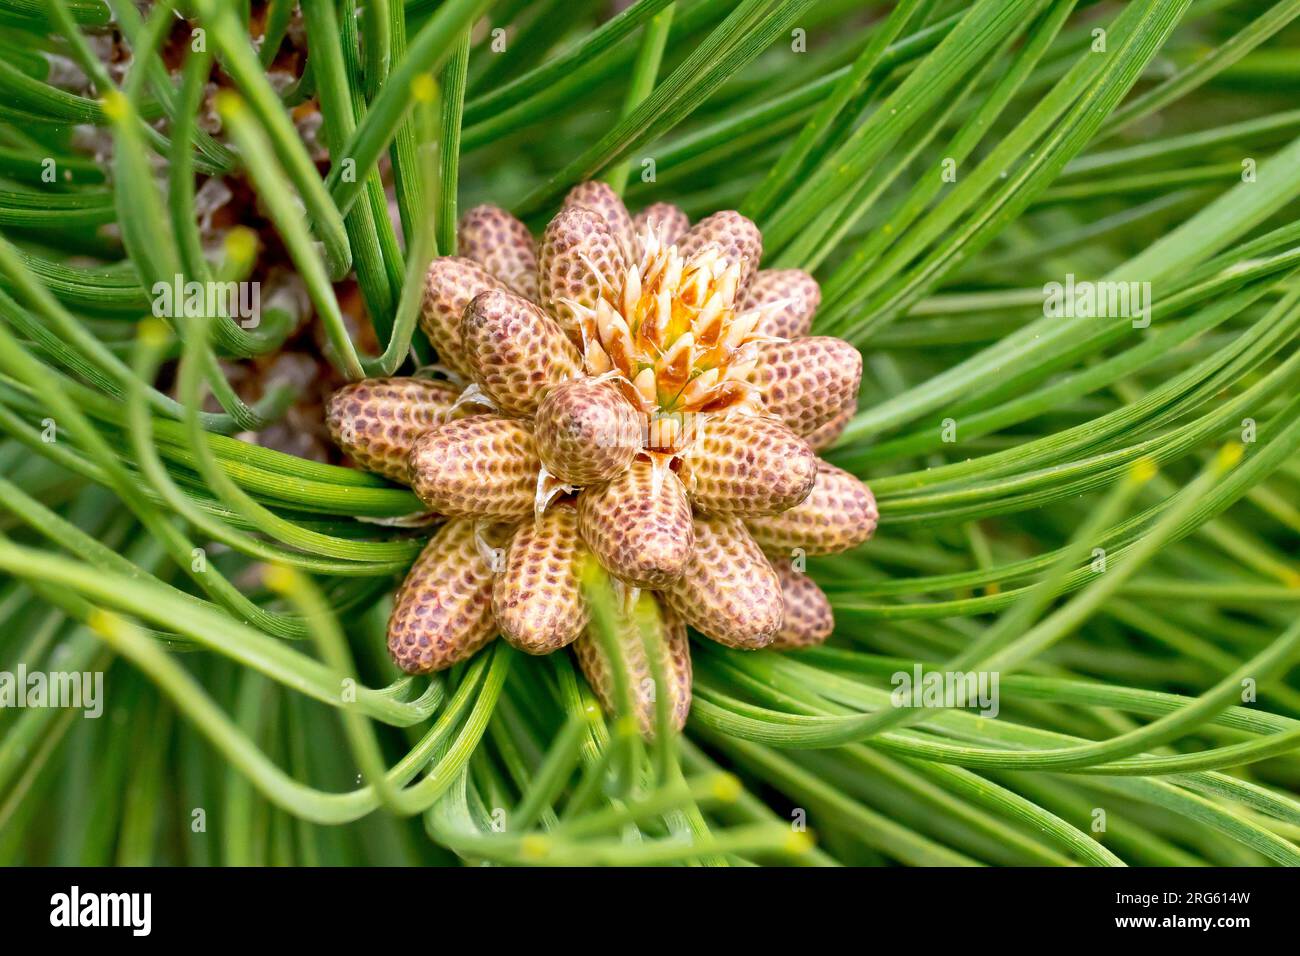 Black Pine (pinus nigra), close up showing a cluster of male flowerbuds at the end of a branch of the tree. Stock Photo